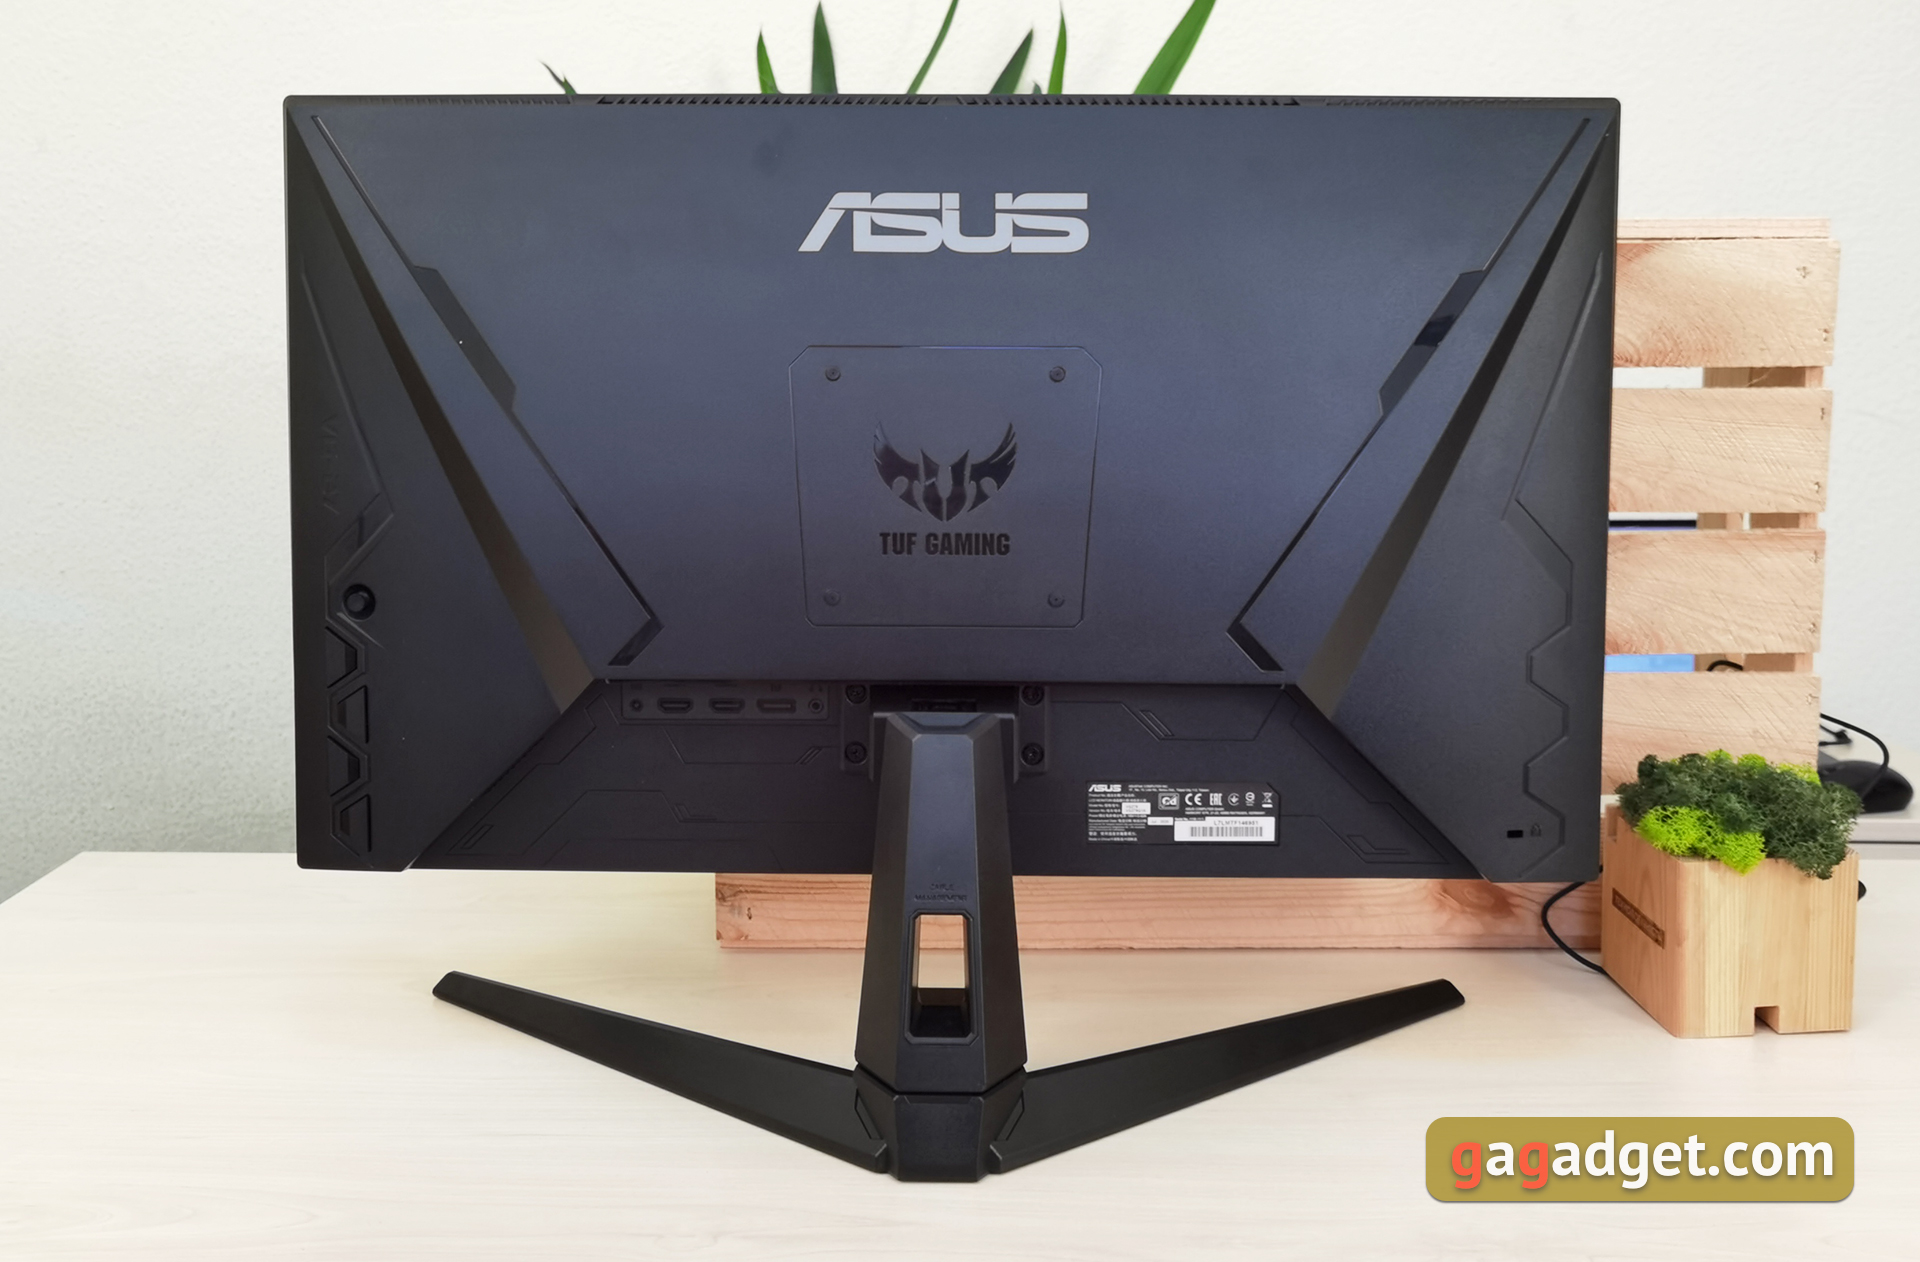 ASUS TUF Gaming VG279Q1A review: 27-inch gaming monitor with IPS panel and 165 Hz refresh rate-11